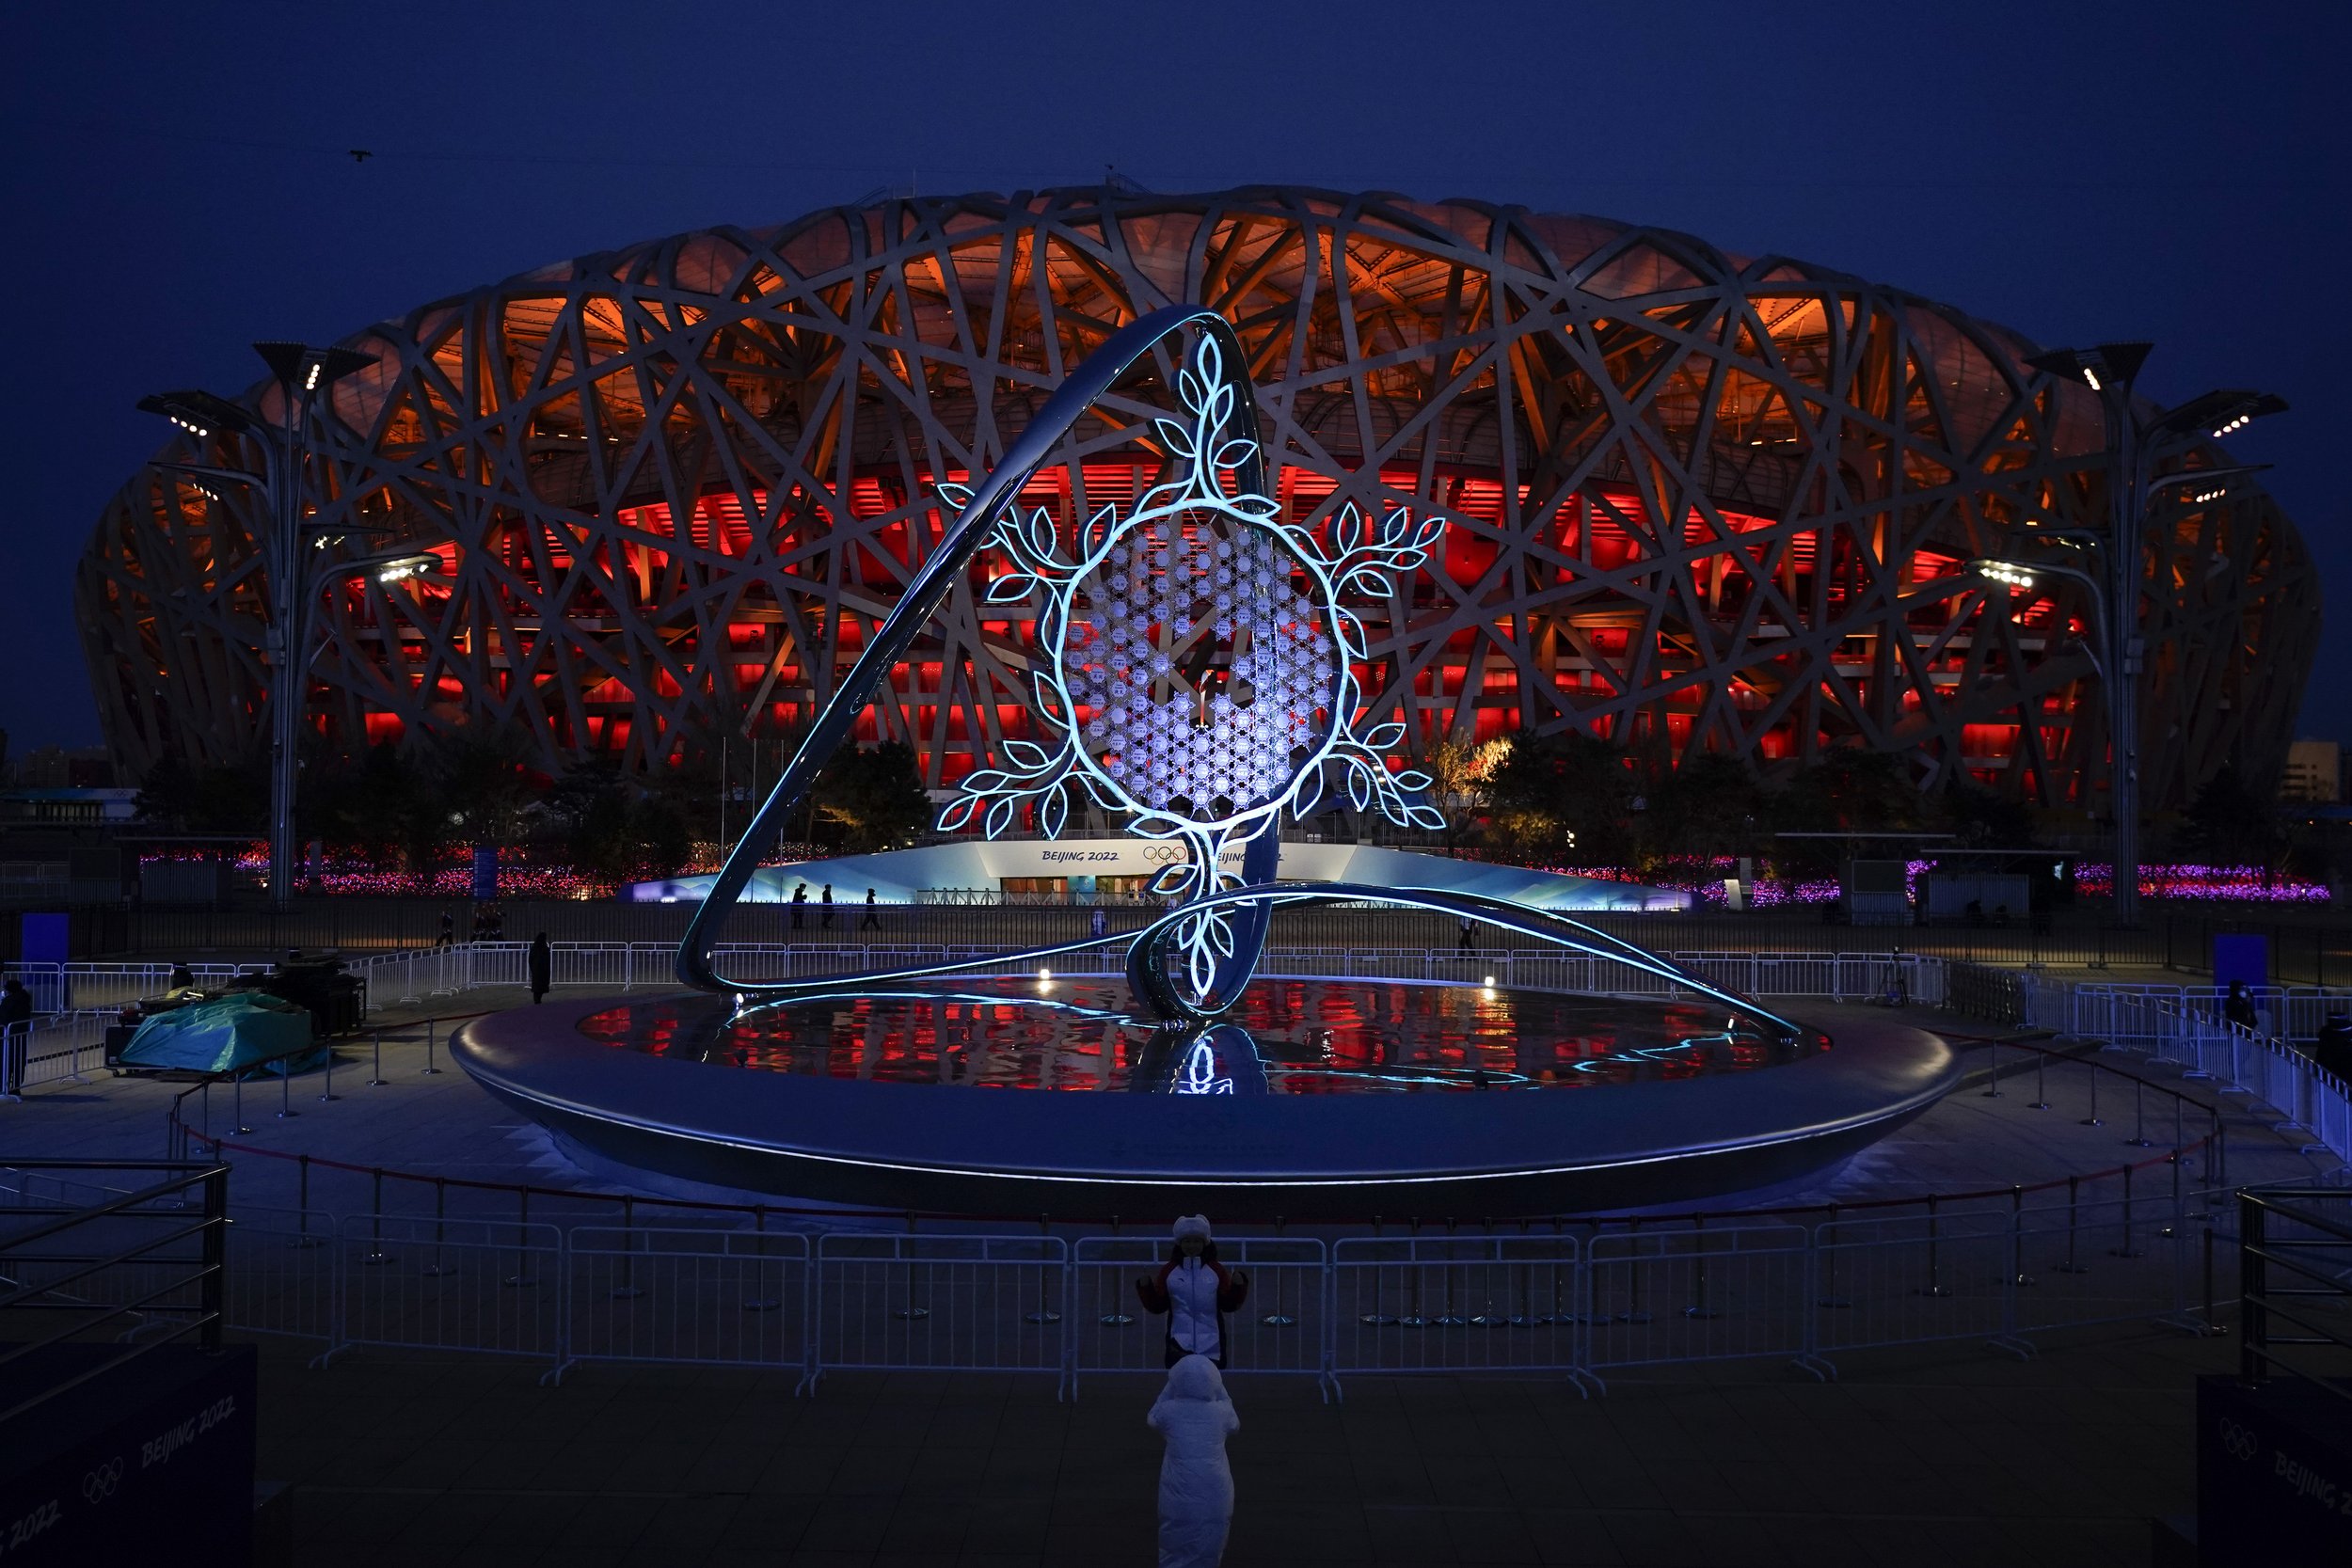  The Olympic flame burning in the center of the snowflake-shaped cauldron is on display near the National Stadium at the 2022 Winter Olympics, Saturday, Feb. 5, 2022, in Beijing. (AP Photo/Jae C. Hong) 